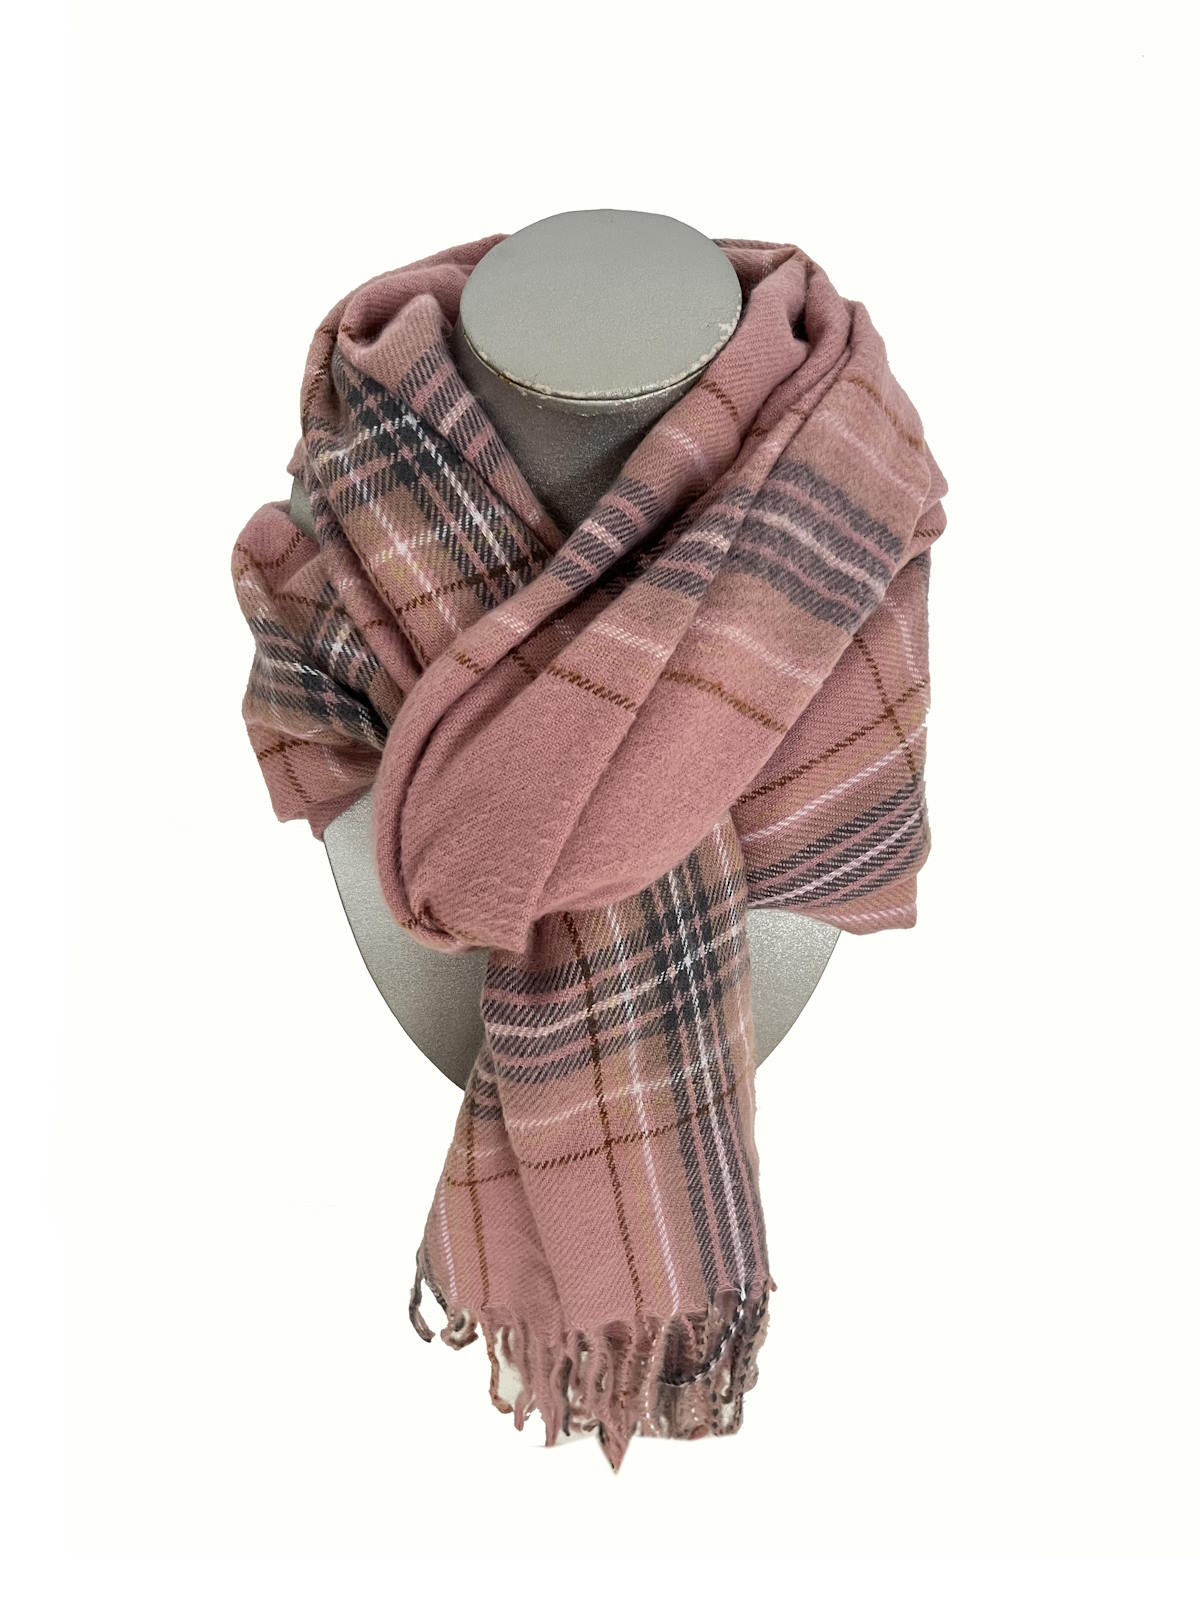 Winter scarf, Gift Box, Coveri Collection,  art. 217040